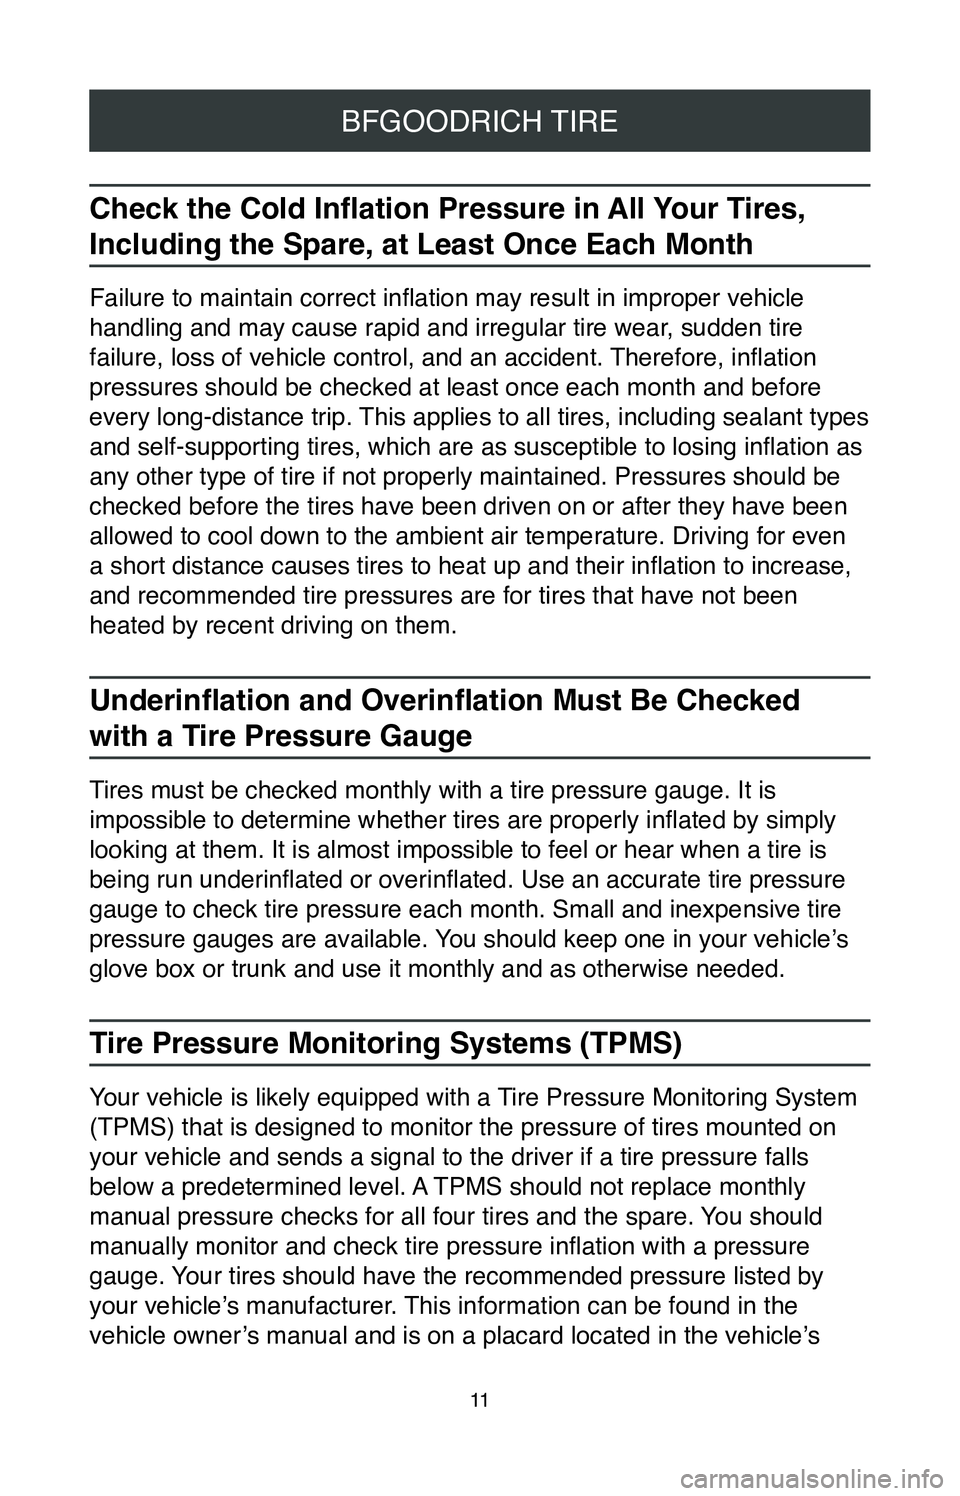 TOYOTA MIRAI 2020  Warranties & Maintenance Guides (in English) 11
BFGOODRICH TIRE
Check the Cold Inflation Pressure in All Your Tires, 
Including the Spare, at Least Once Each Month
Failure to maintain correct inflation may result in improper vehicle 
handling an